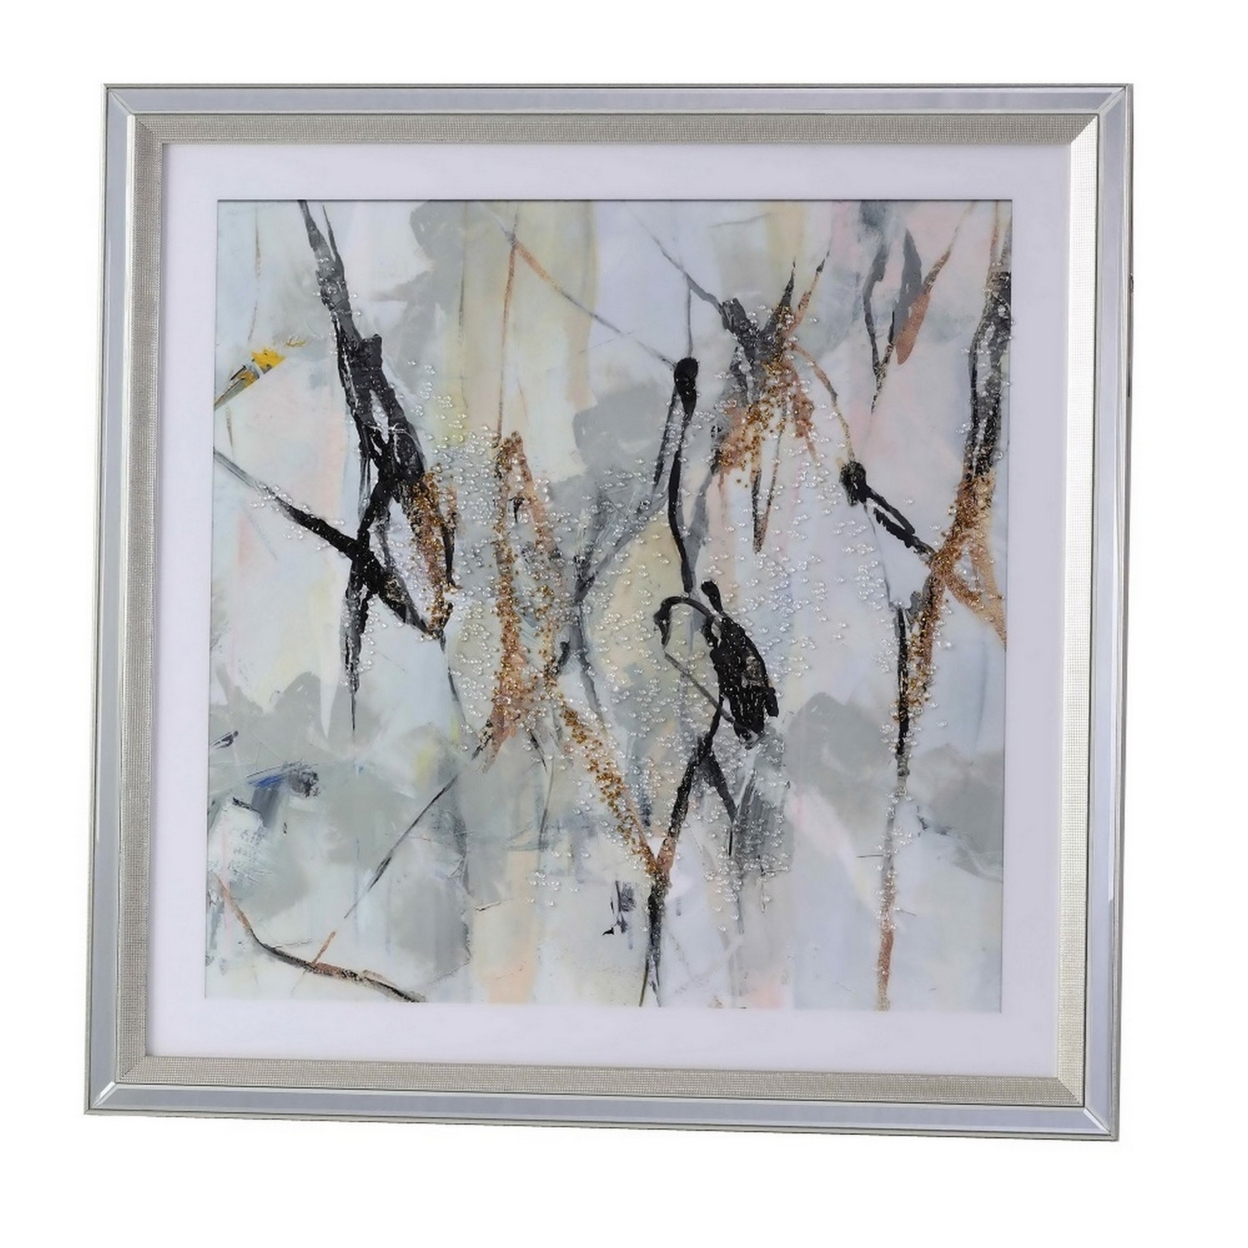 Wall Art With Acrylic Mirror Frame And Abstract Painting, Silver- Saltoro Sherpi